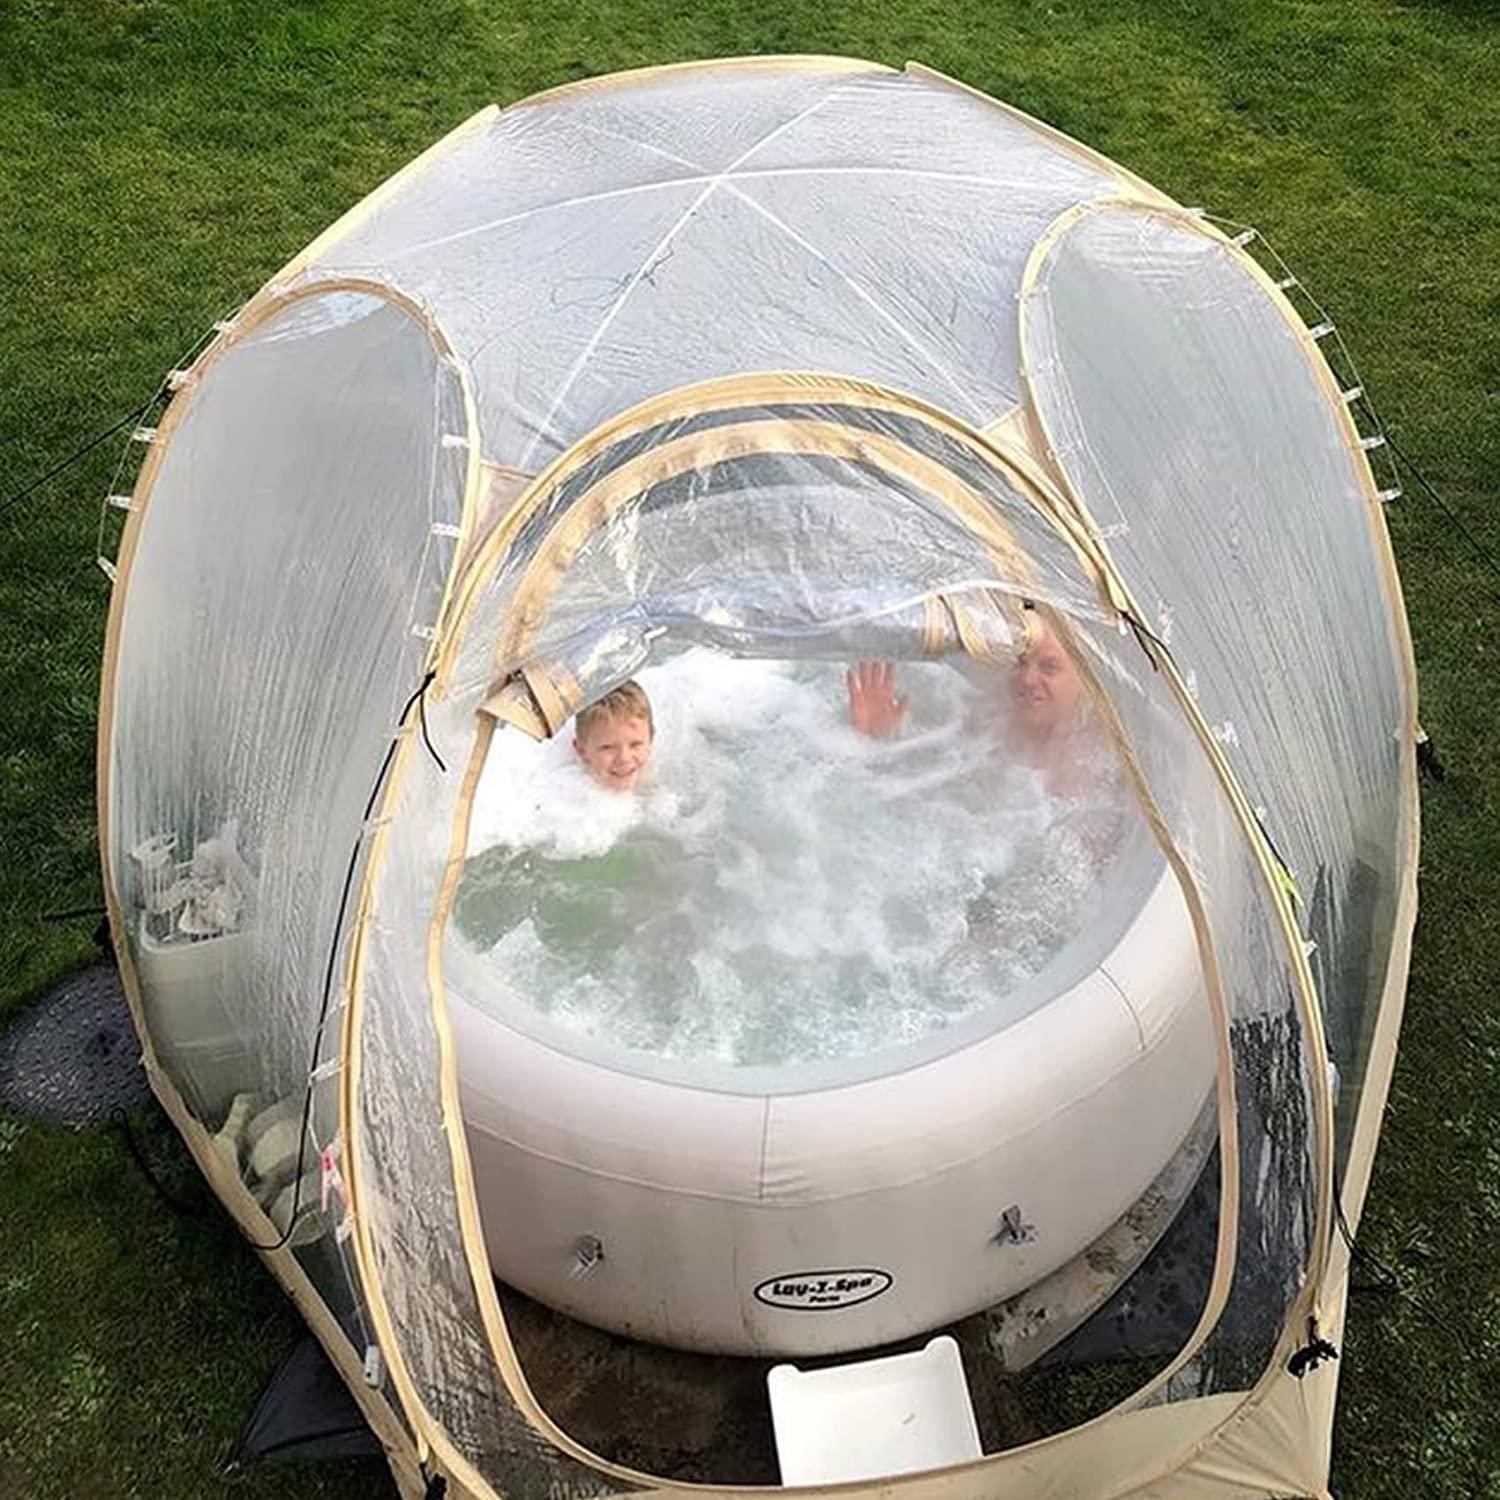 10'x10' bubble tent to cover the hot tub